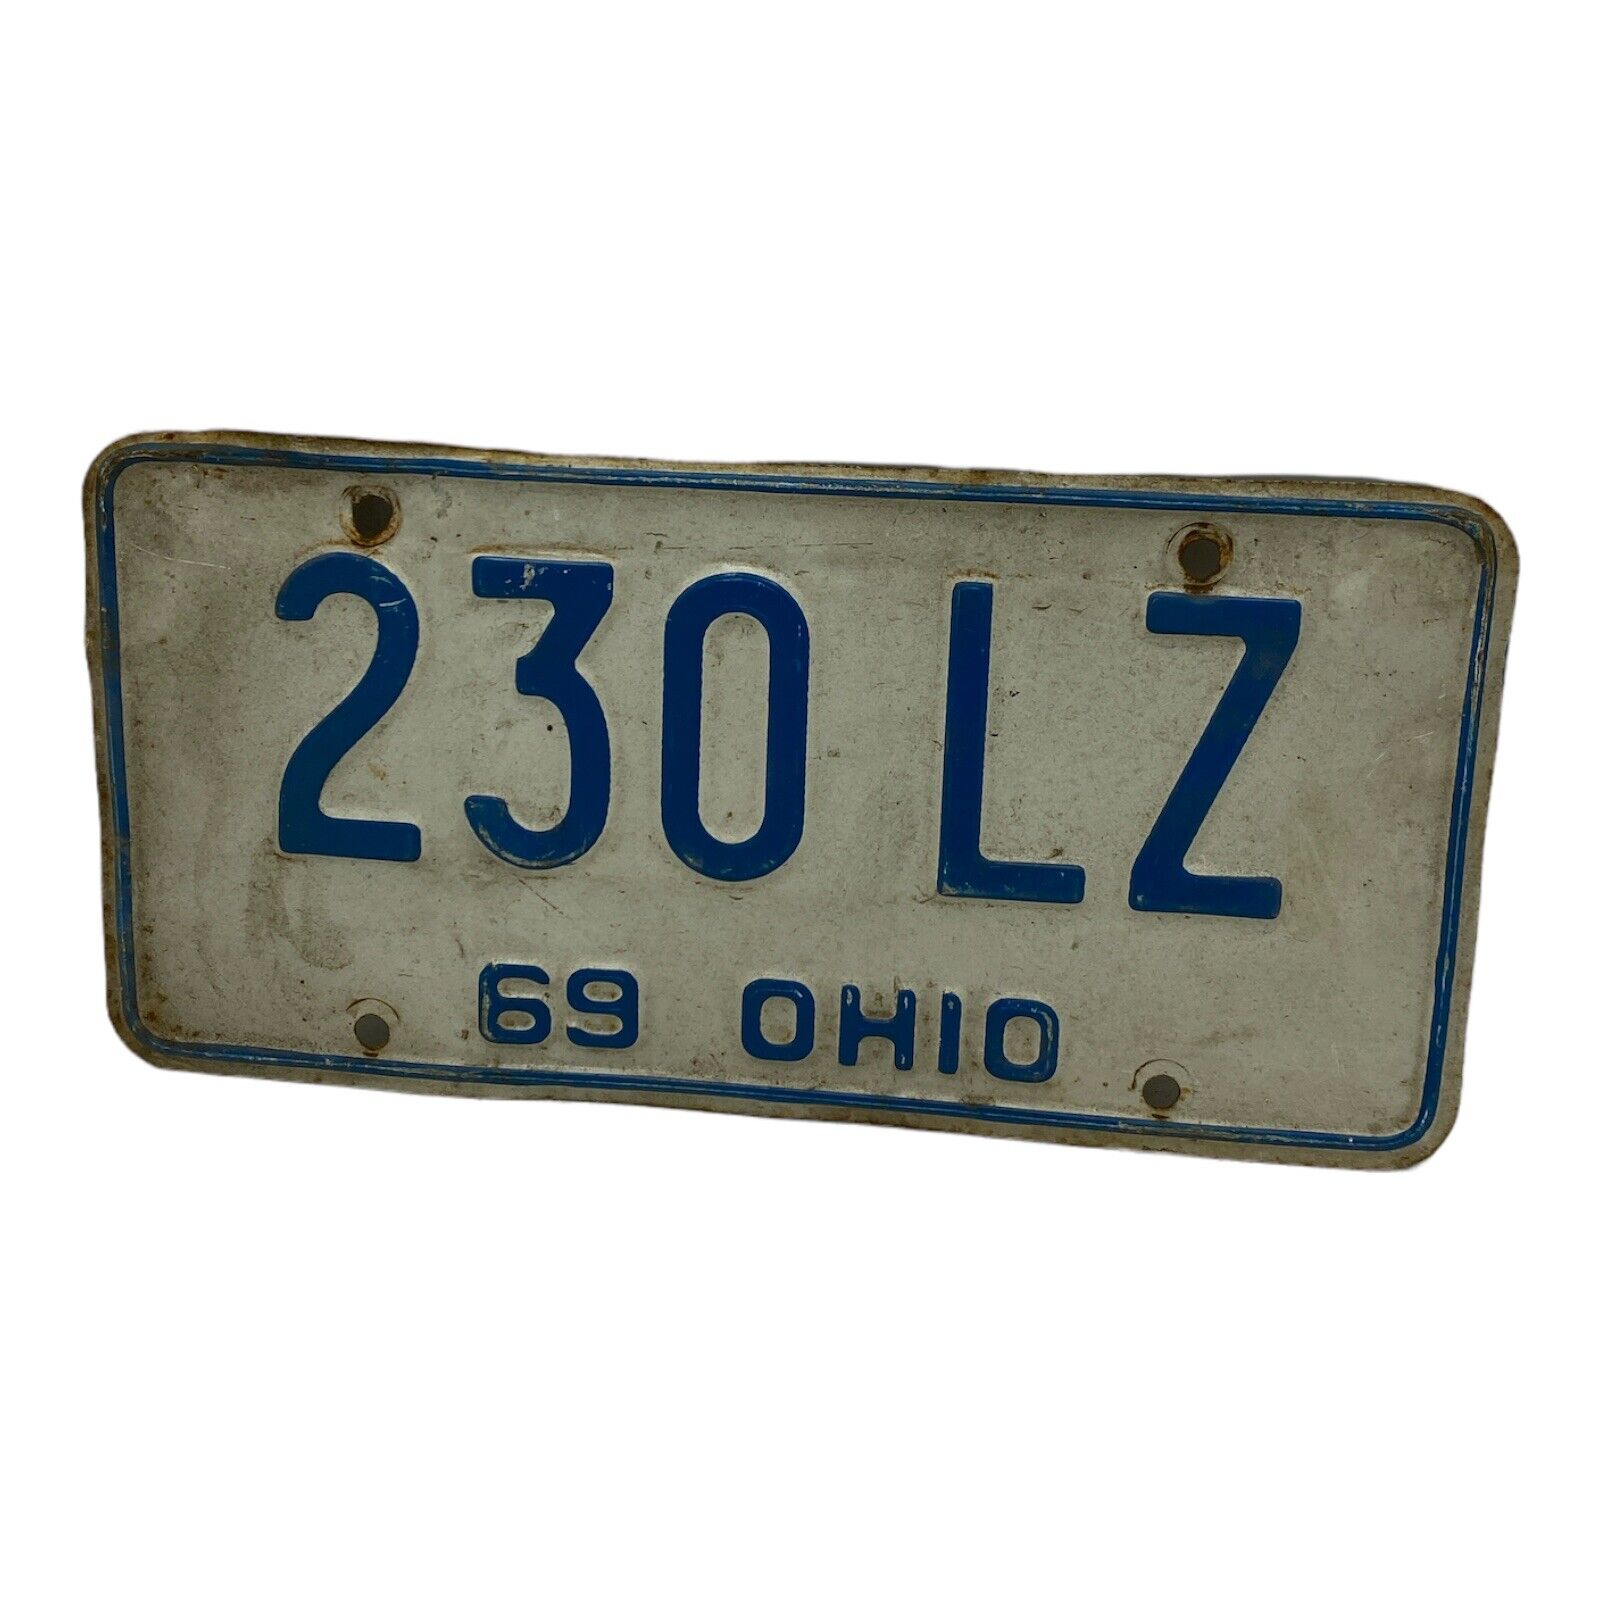 Old License Plate RUSTY CRUSTY  Woppity Bent - Ohio 1969 Plate no. 230 LZ